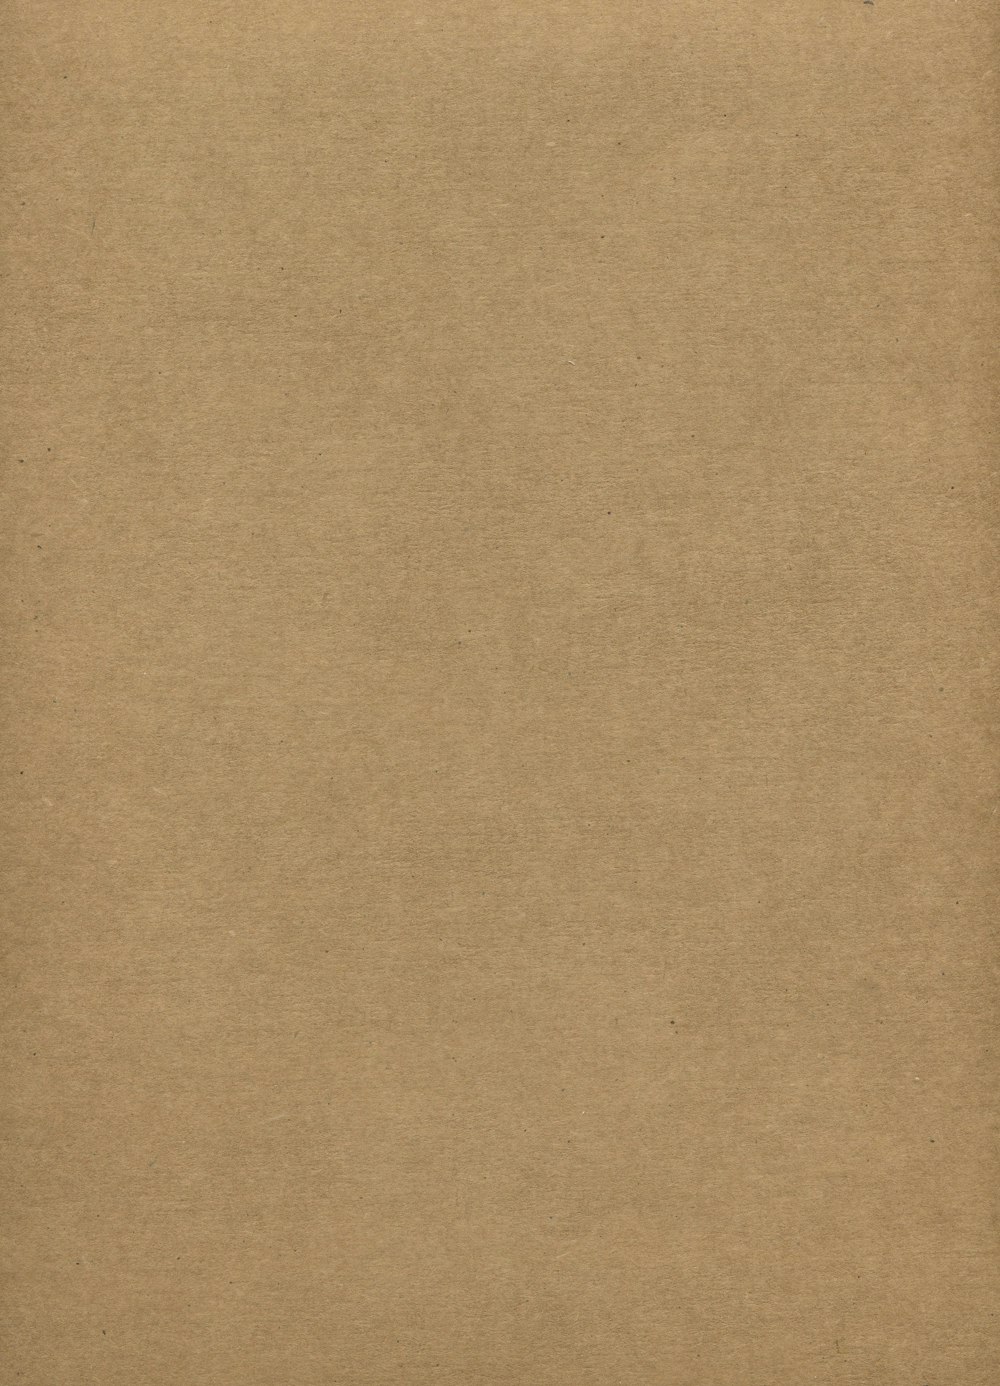 Dark brown clean paper texture Stock Photo by ©flas100 57252373